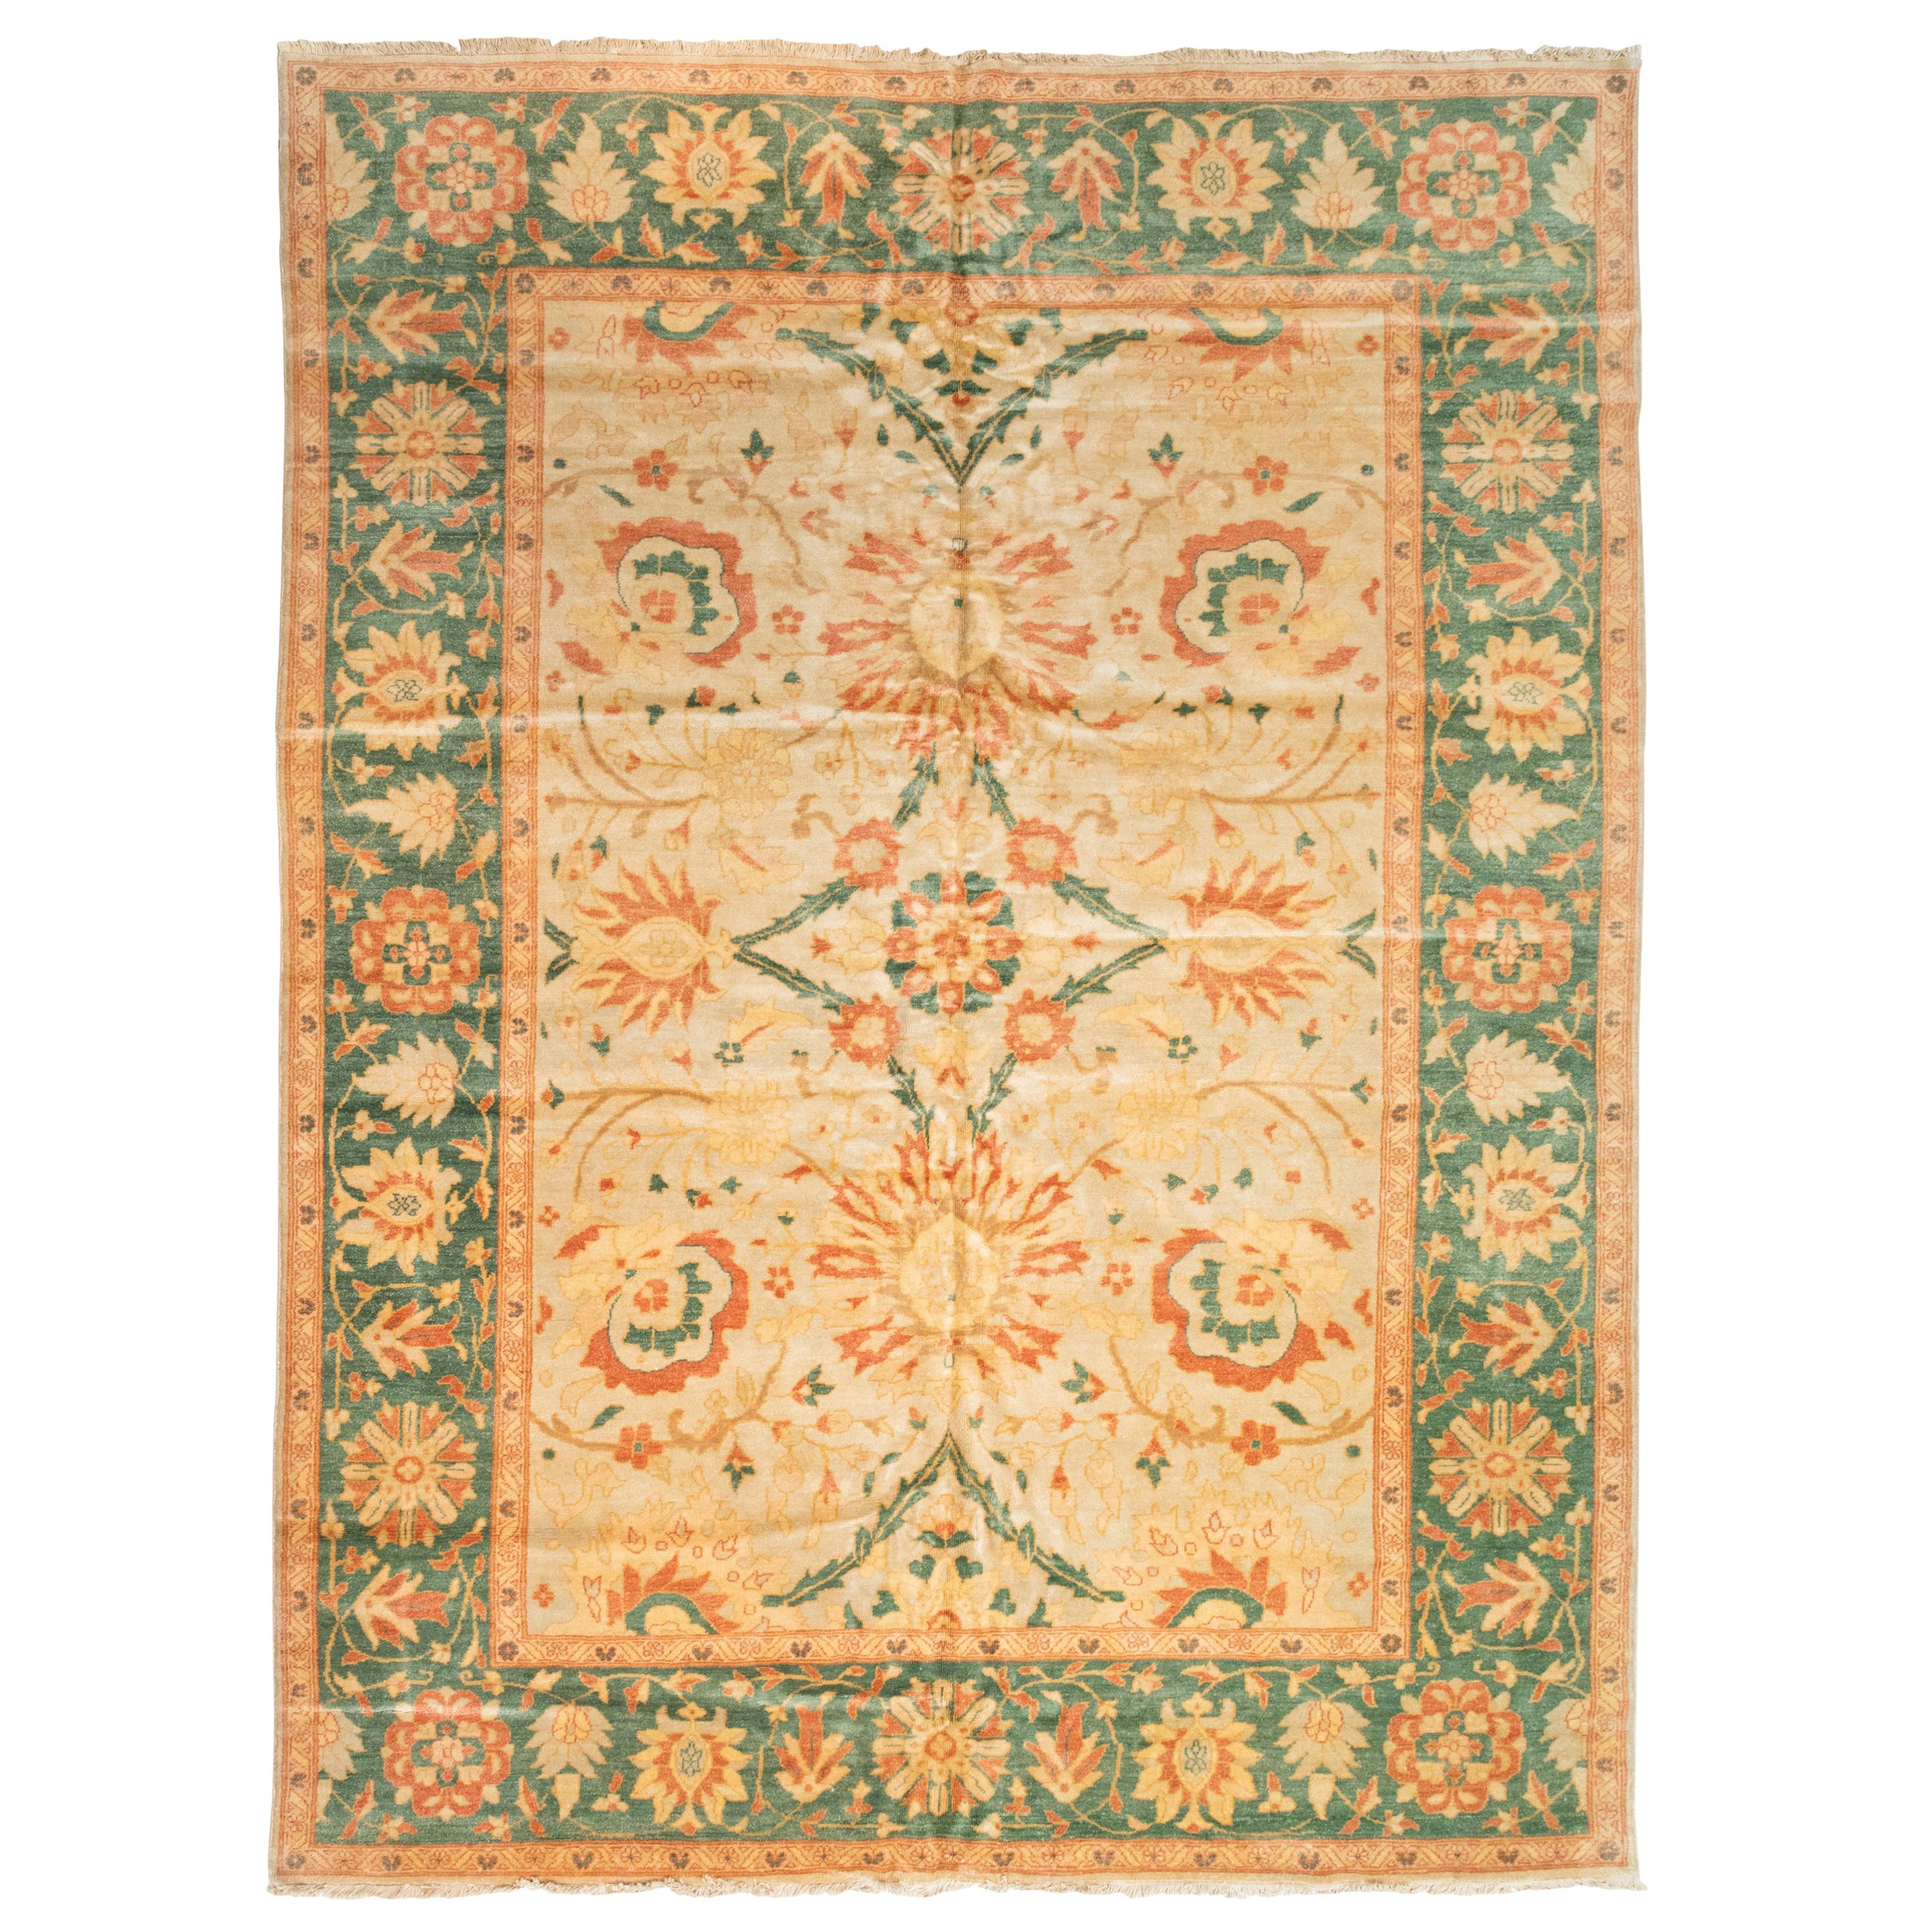 Late 20th Century Green Gold Ivory Floral Egyptian Rug Persian Design